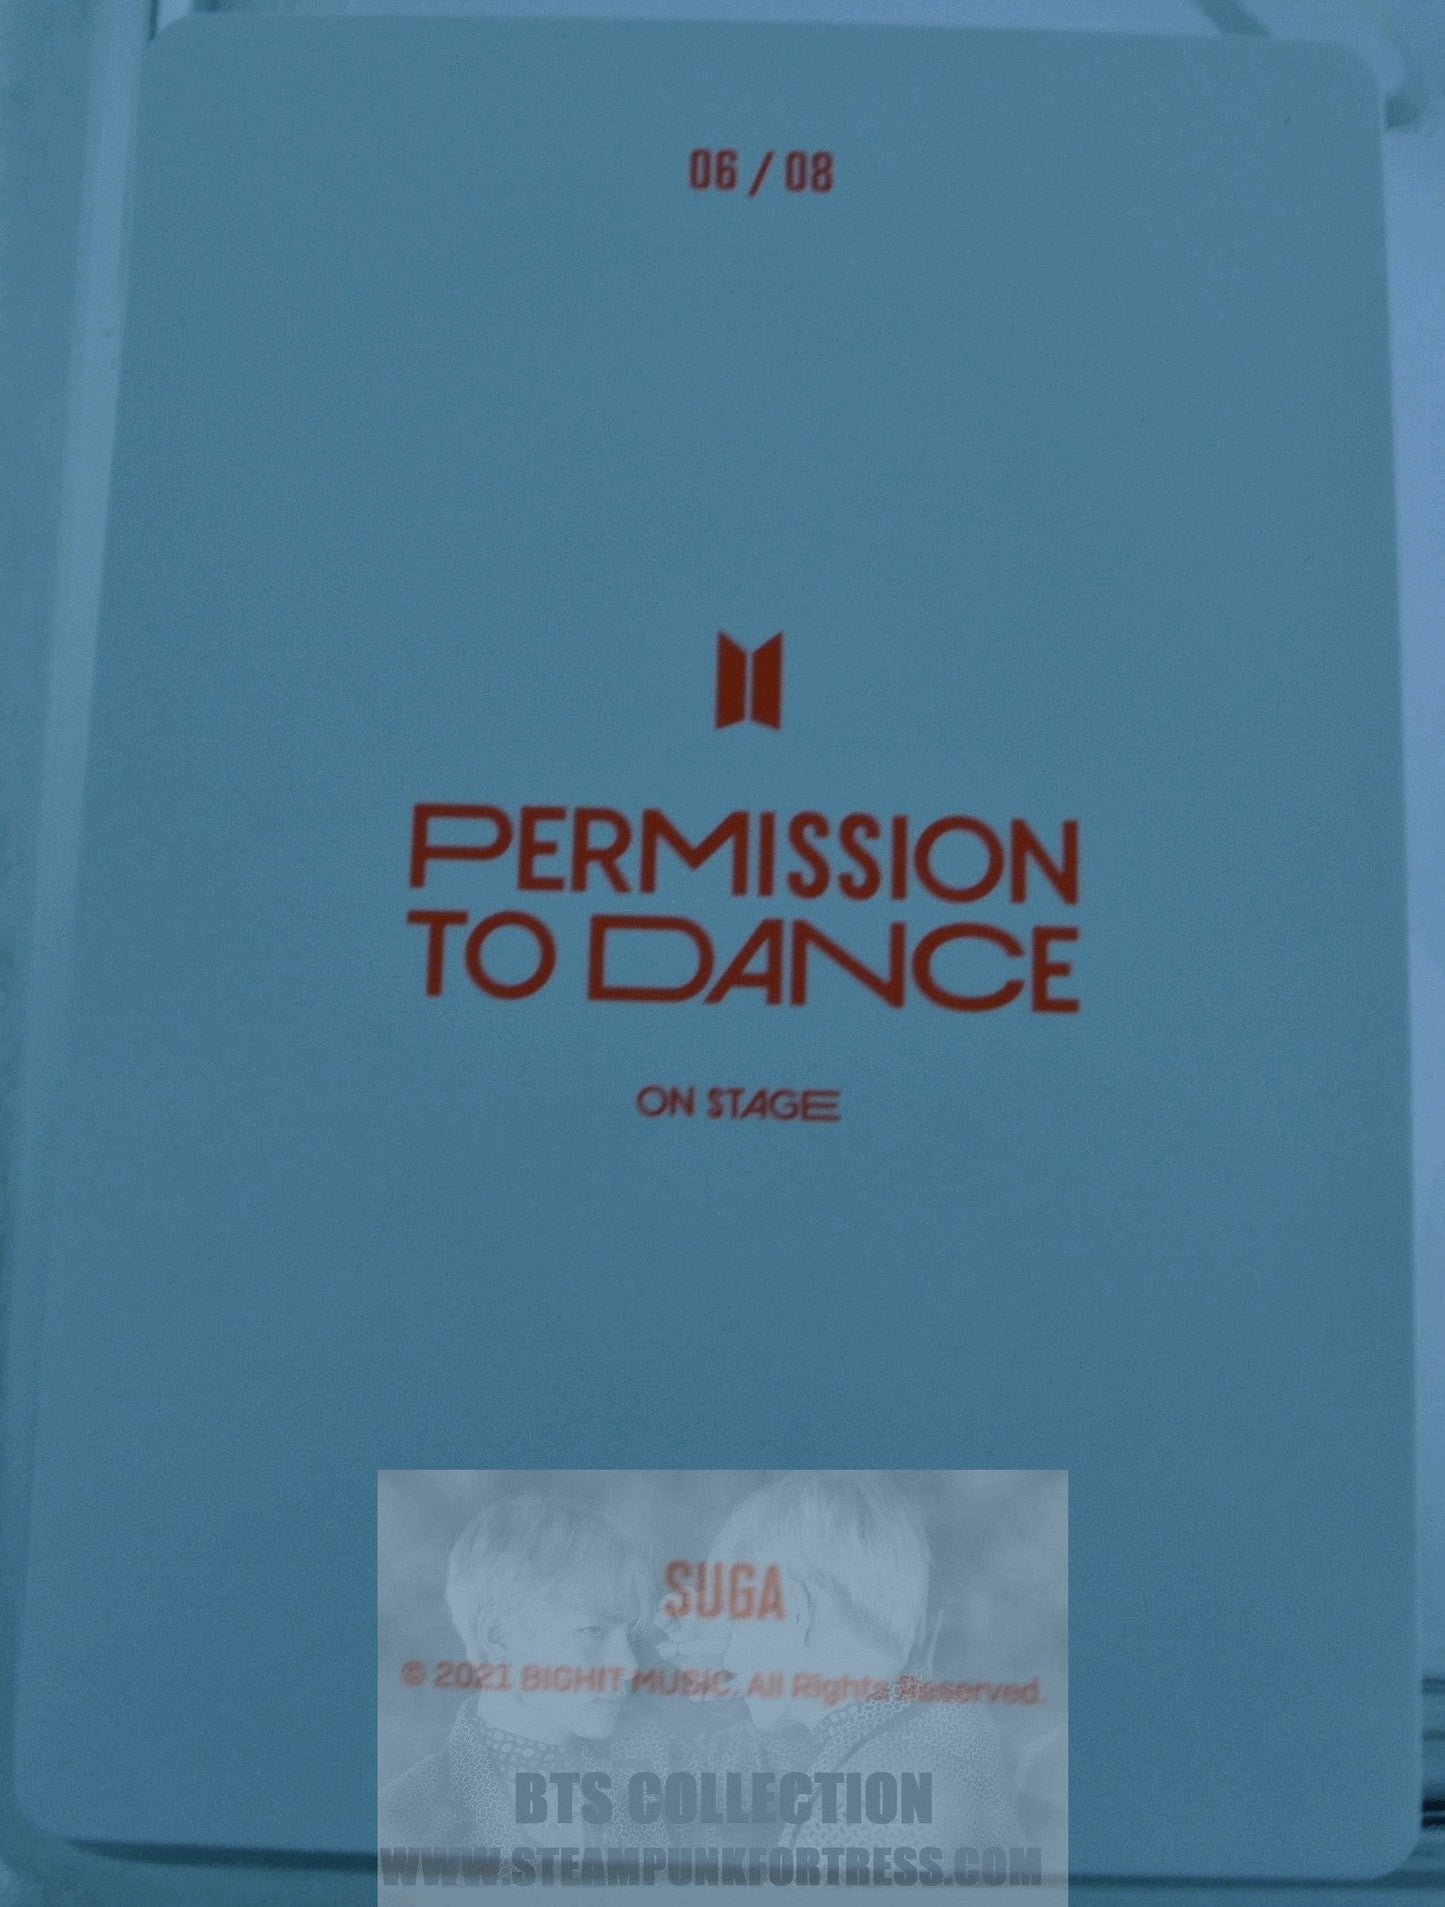 BTS SUGA MIN YOONGI YOON-GI PTD 2021 PERMISSION TO DANCE ON STAGE #6 OF 8 PHOTOCARD PHOTO CARD NEW OFFICIAL MERCHANDISE